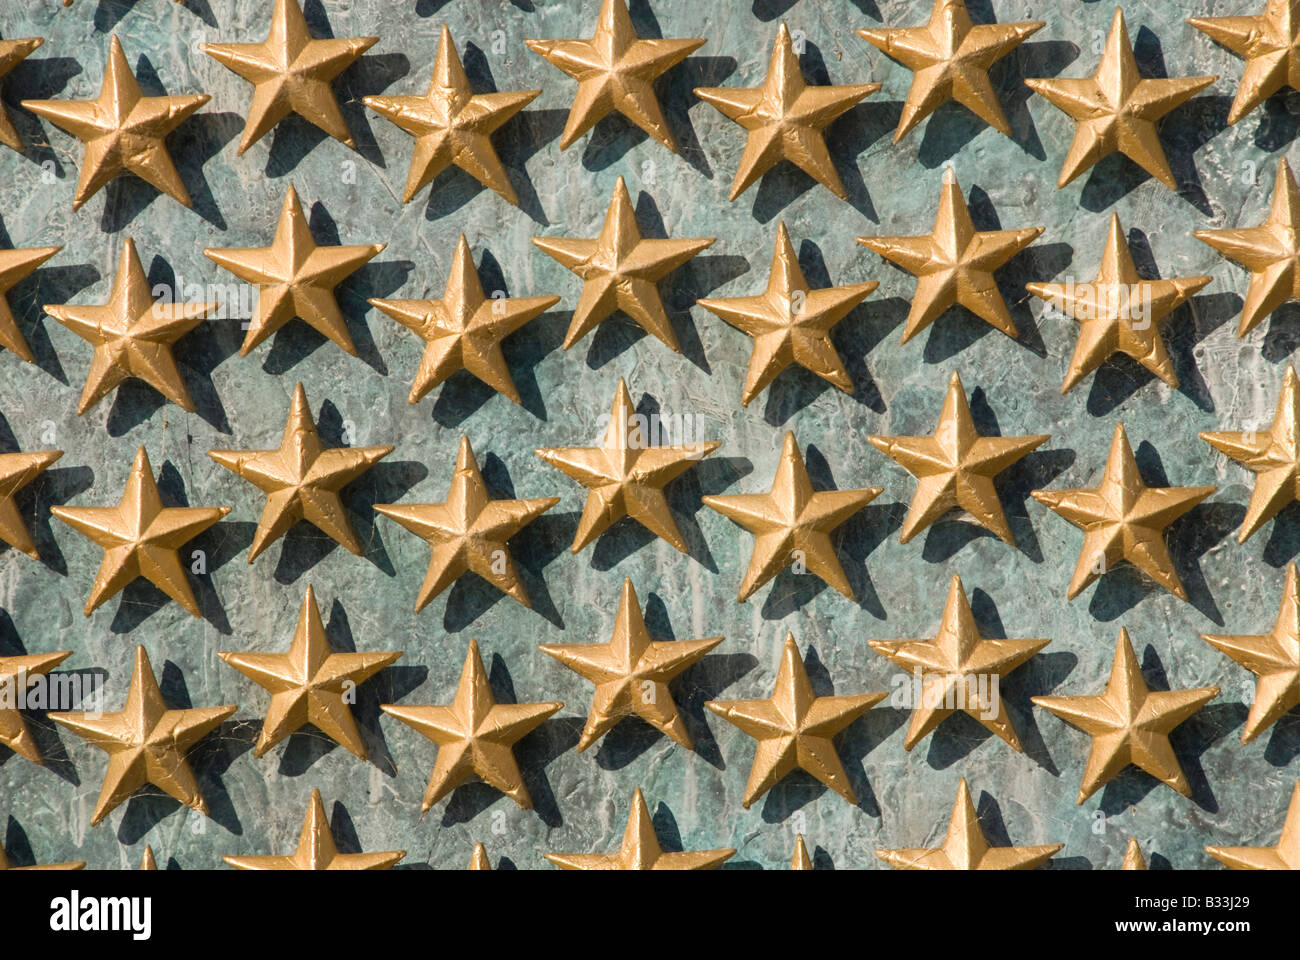 The National World War II Memorial on the Mall in Washington, DC. Each star represents 100 soldiers who died. Stock Photo